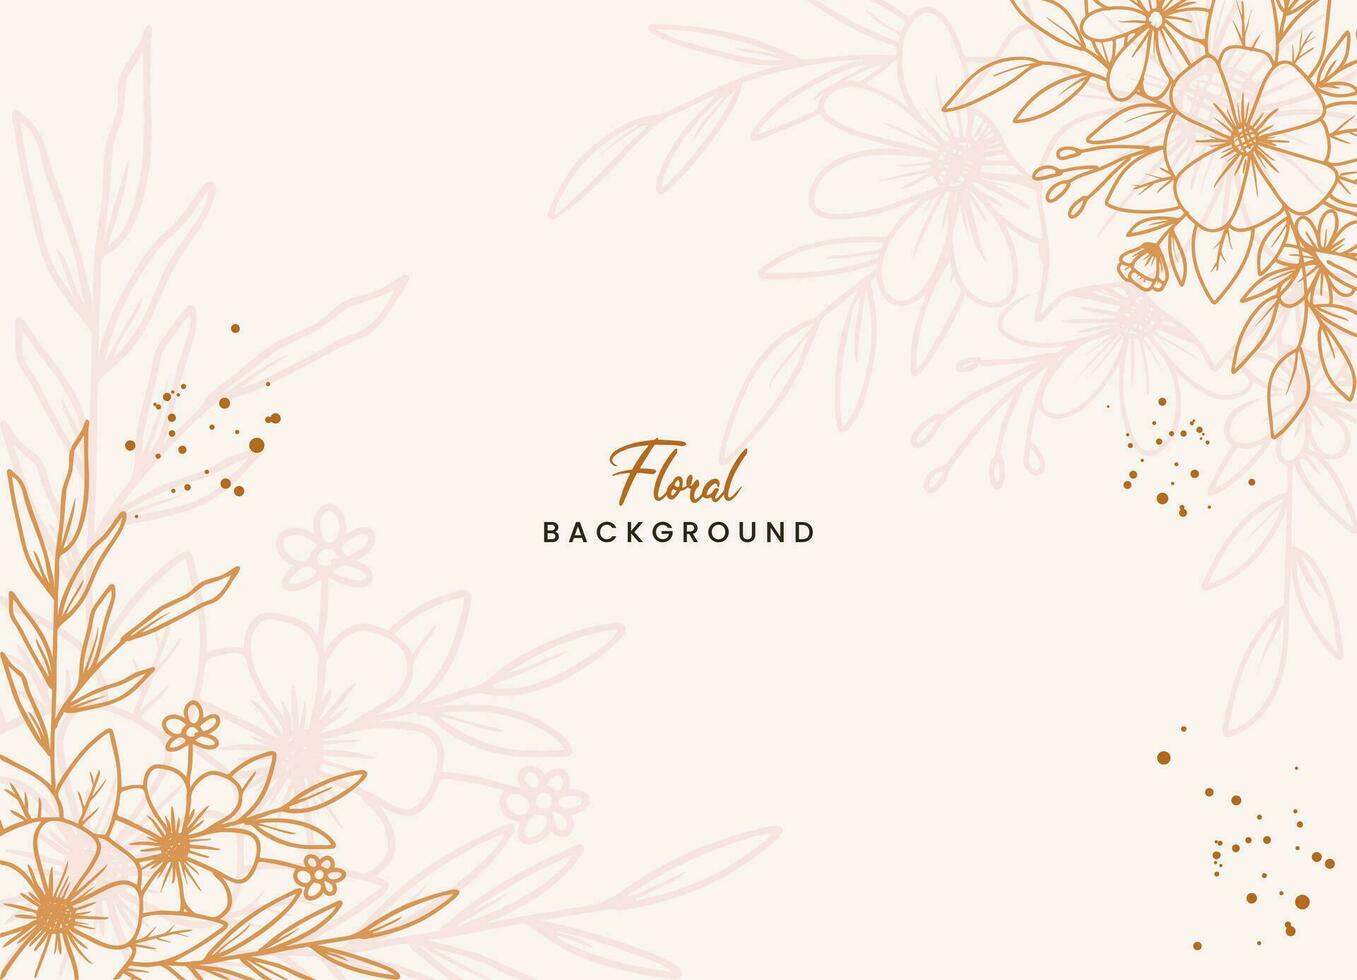 Hand-drawn floral botanical background with line art flowers and leaves vector